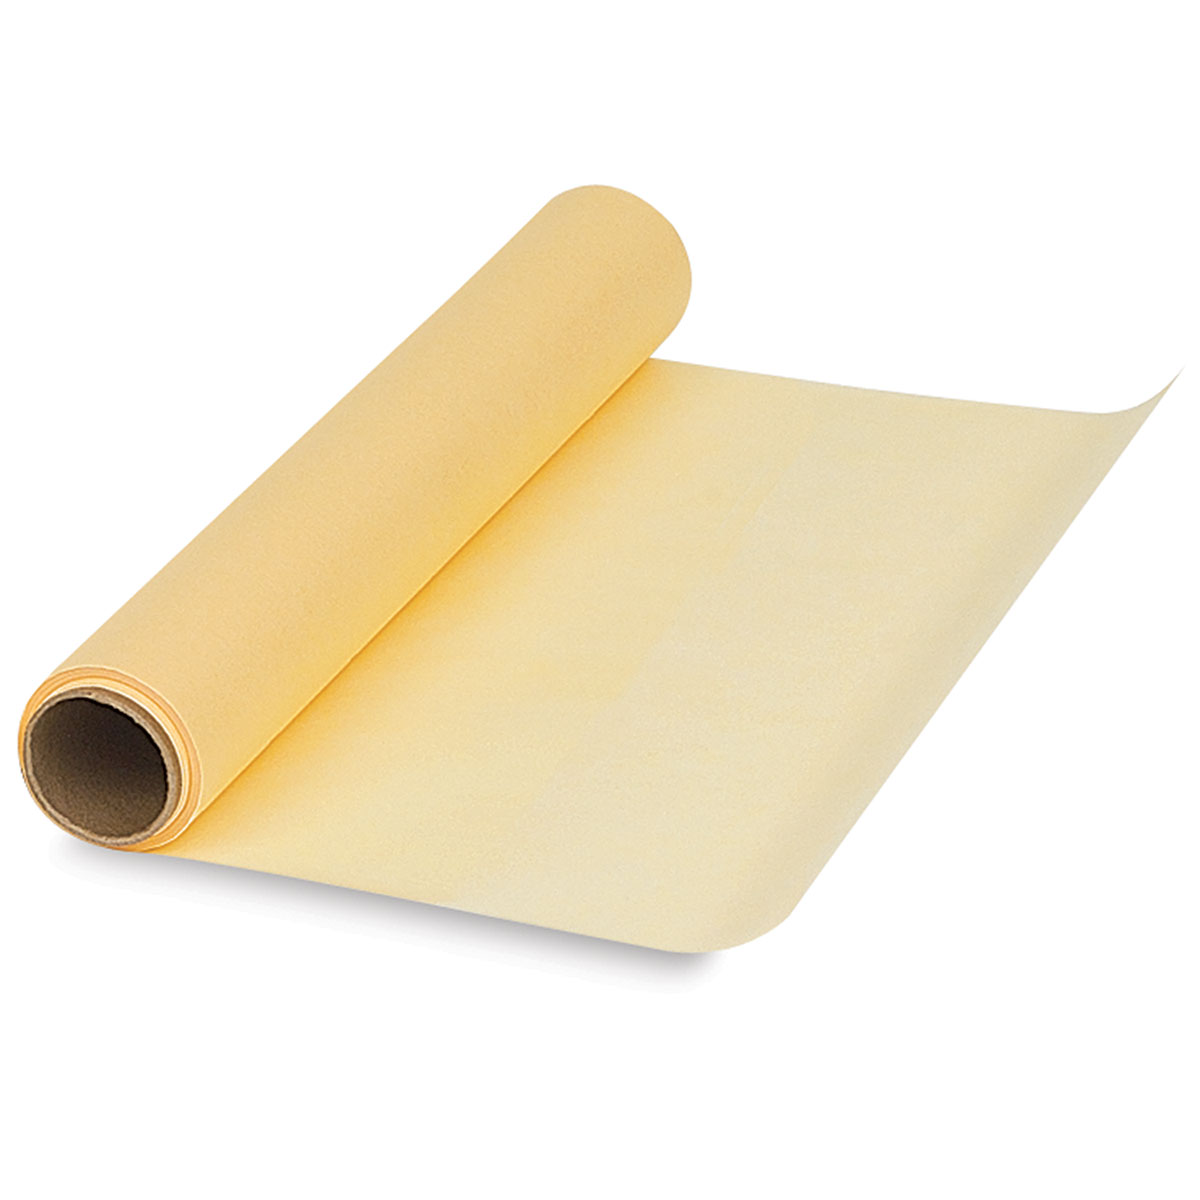 Yellowtrace Paper is the preferred architectural tracing paper